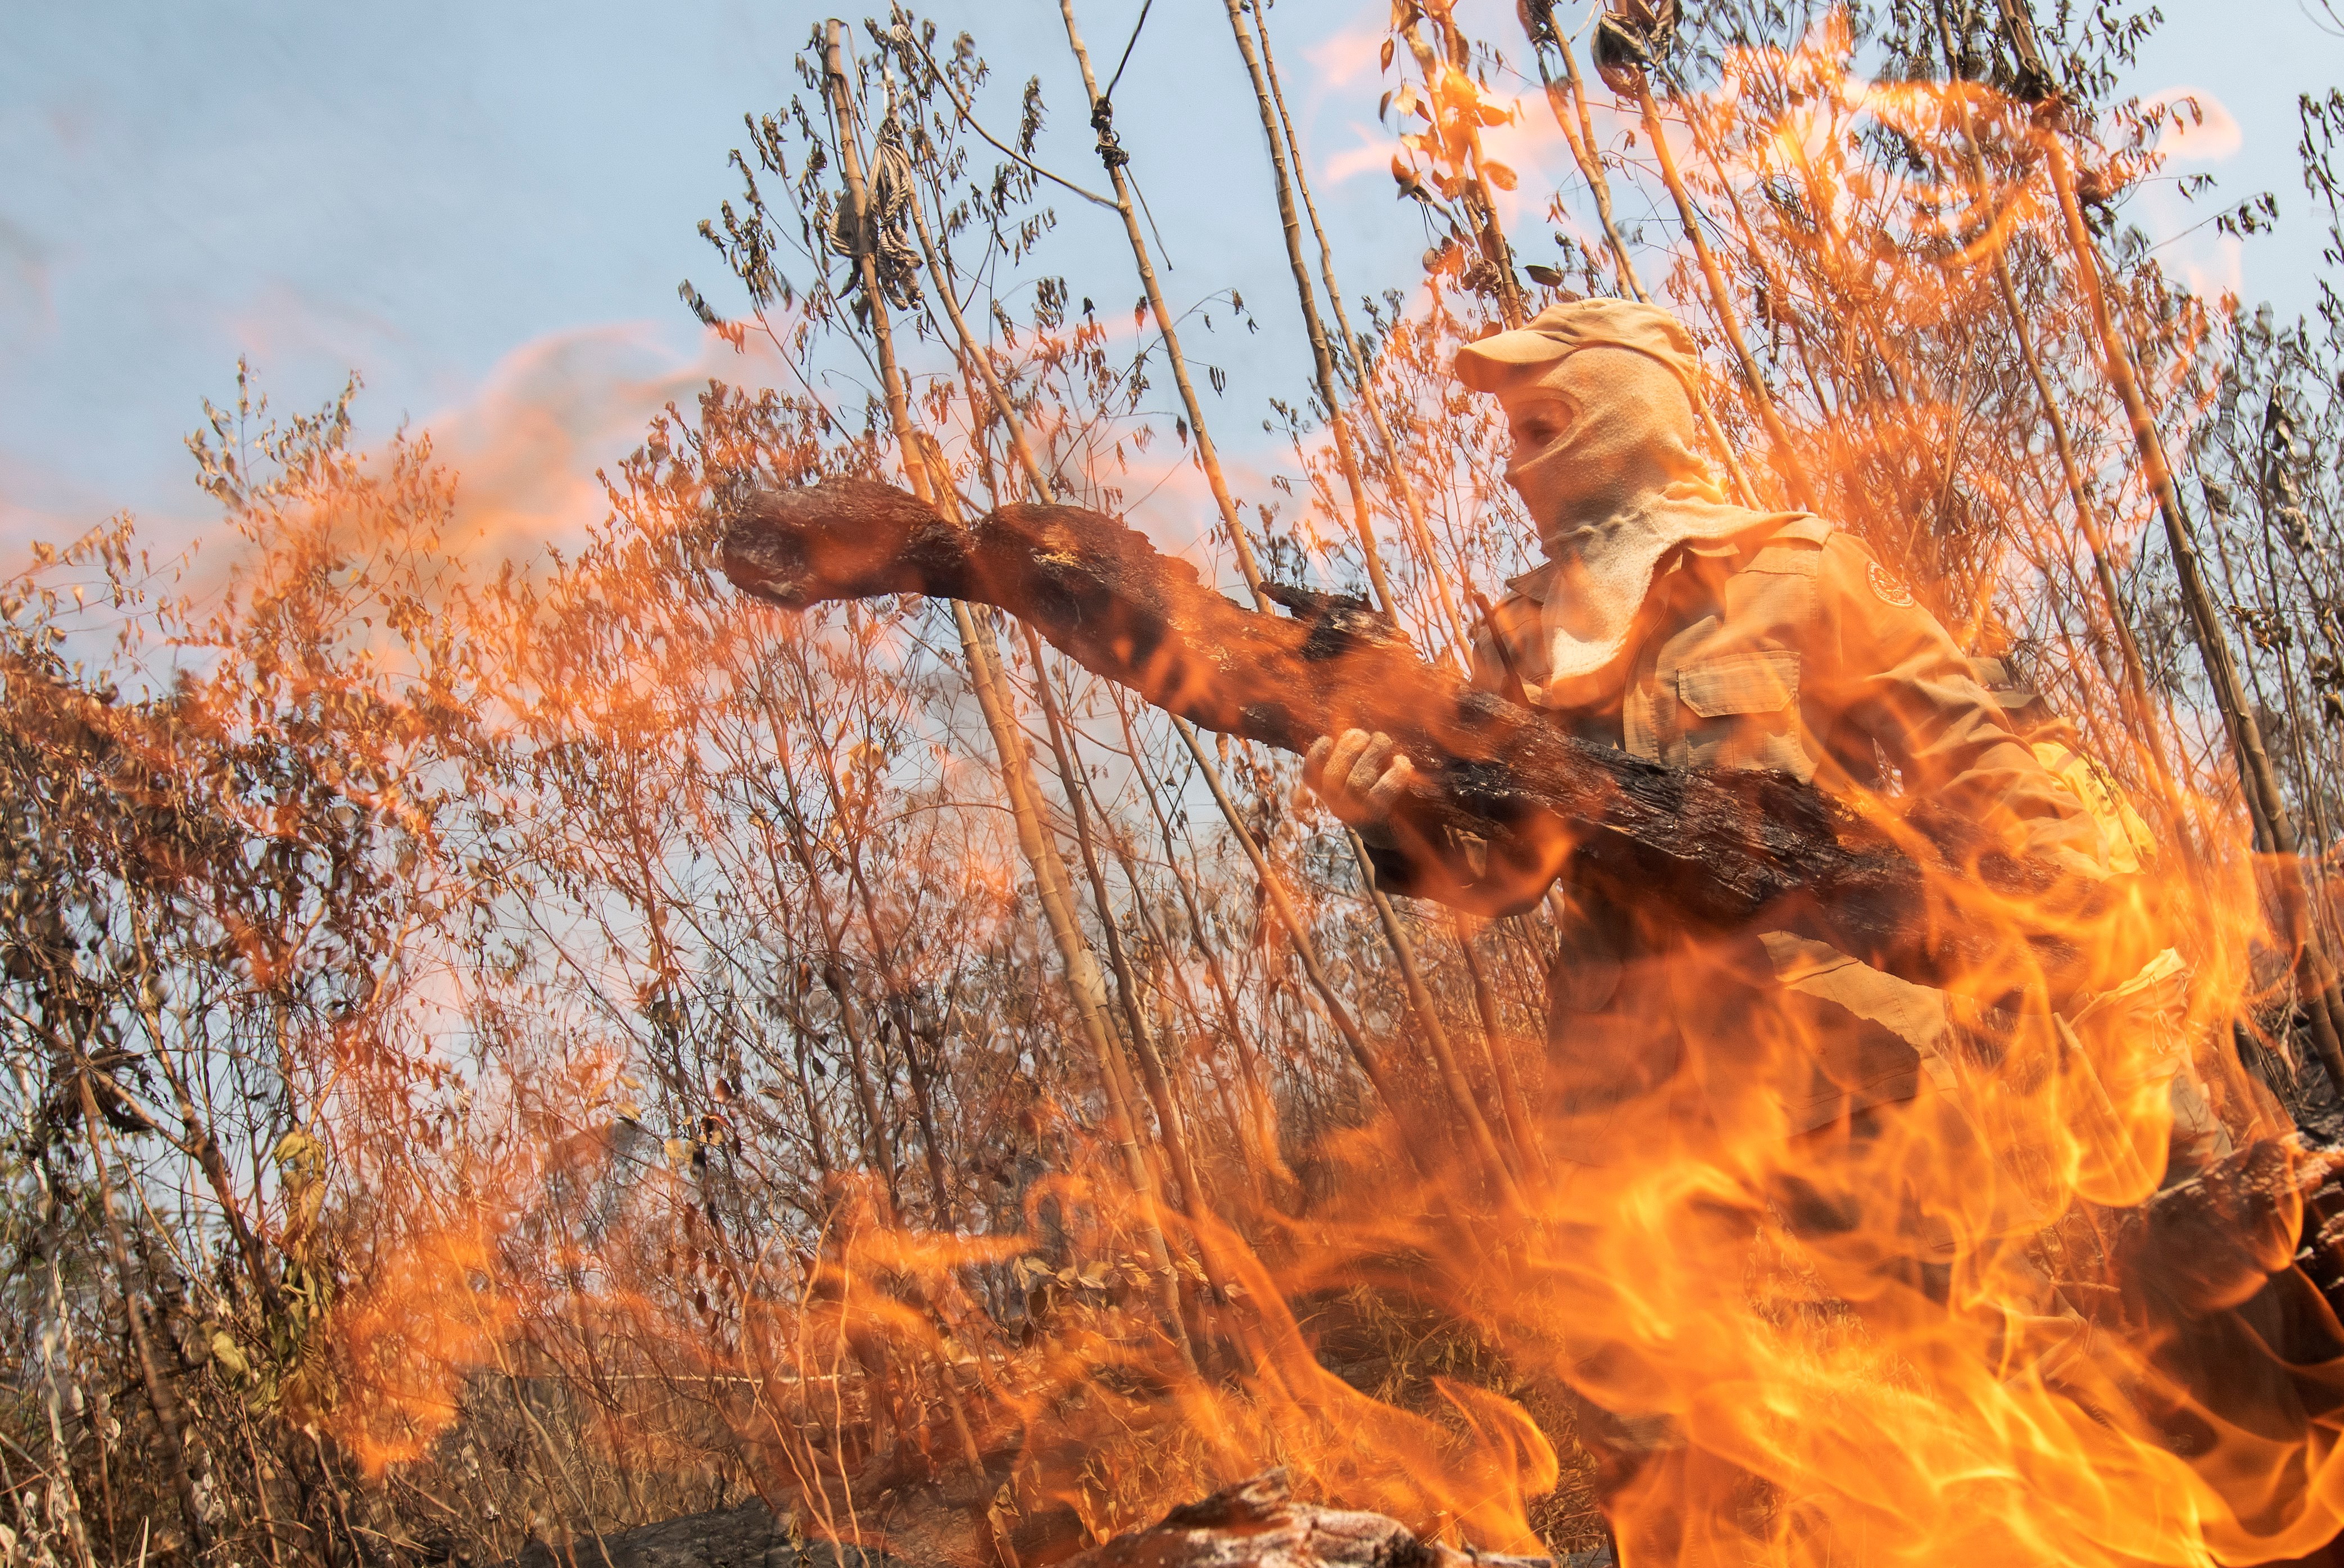 epa07799816 A fireman work to extinguish a fire at a forest near Porto Velho, Brazil, 28 August 2019. Brazil Amazon region suffer the worst fires of the last years. The government of Brazil has deployed some 40 thousand military personnel in the Amazon region.  EPA/Joedson Alves